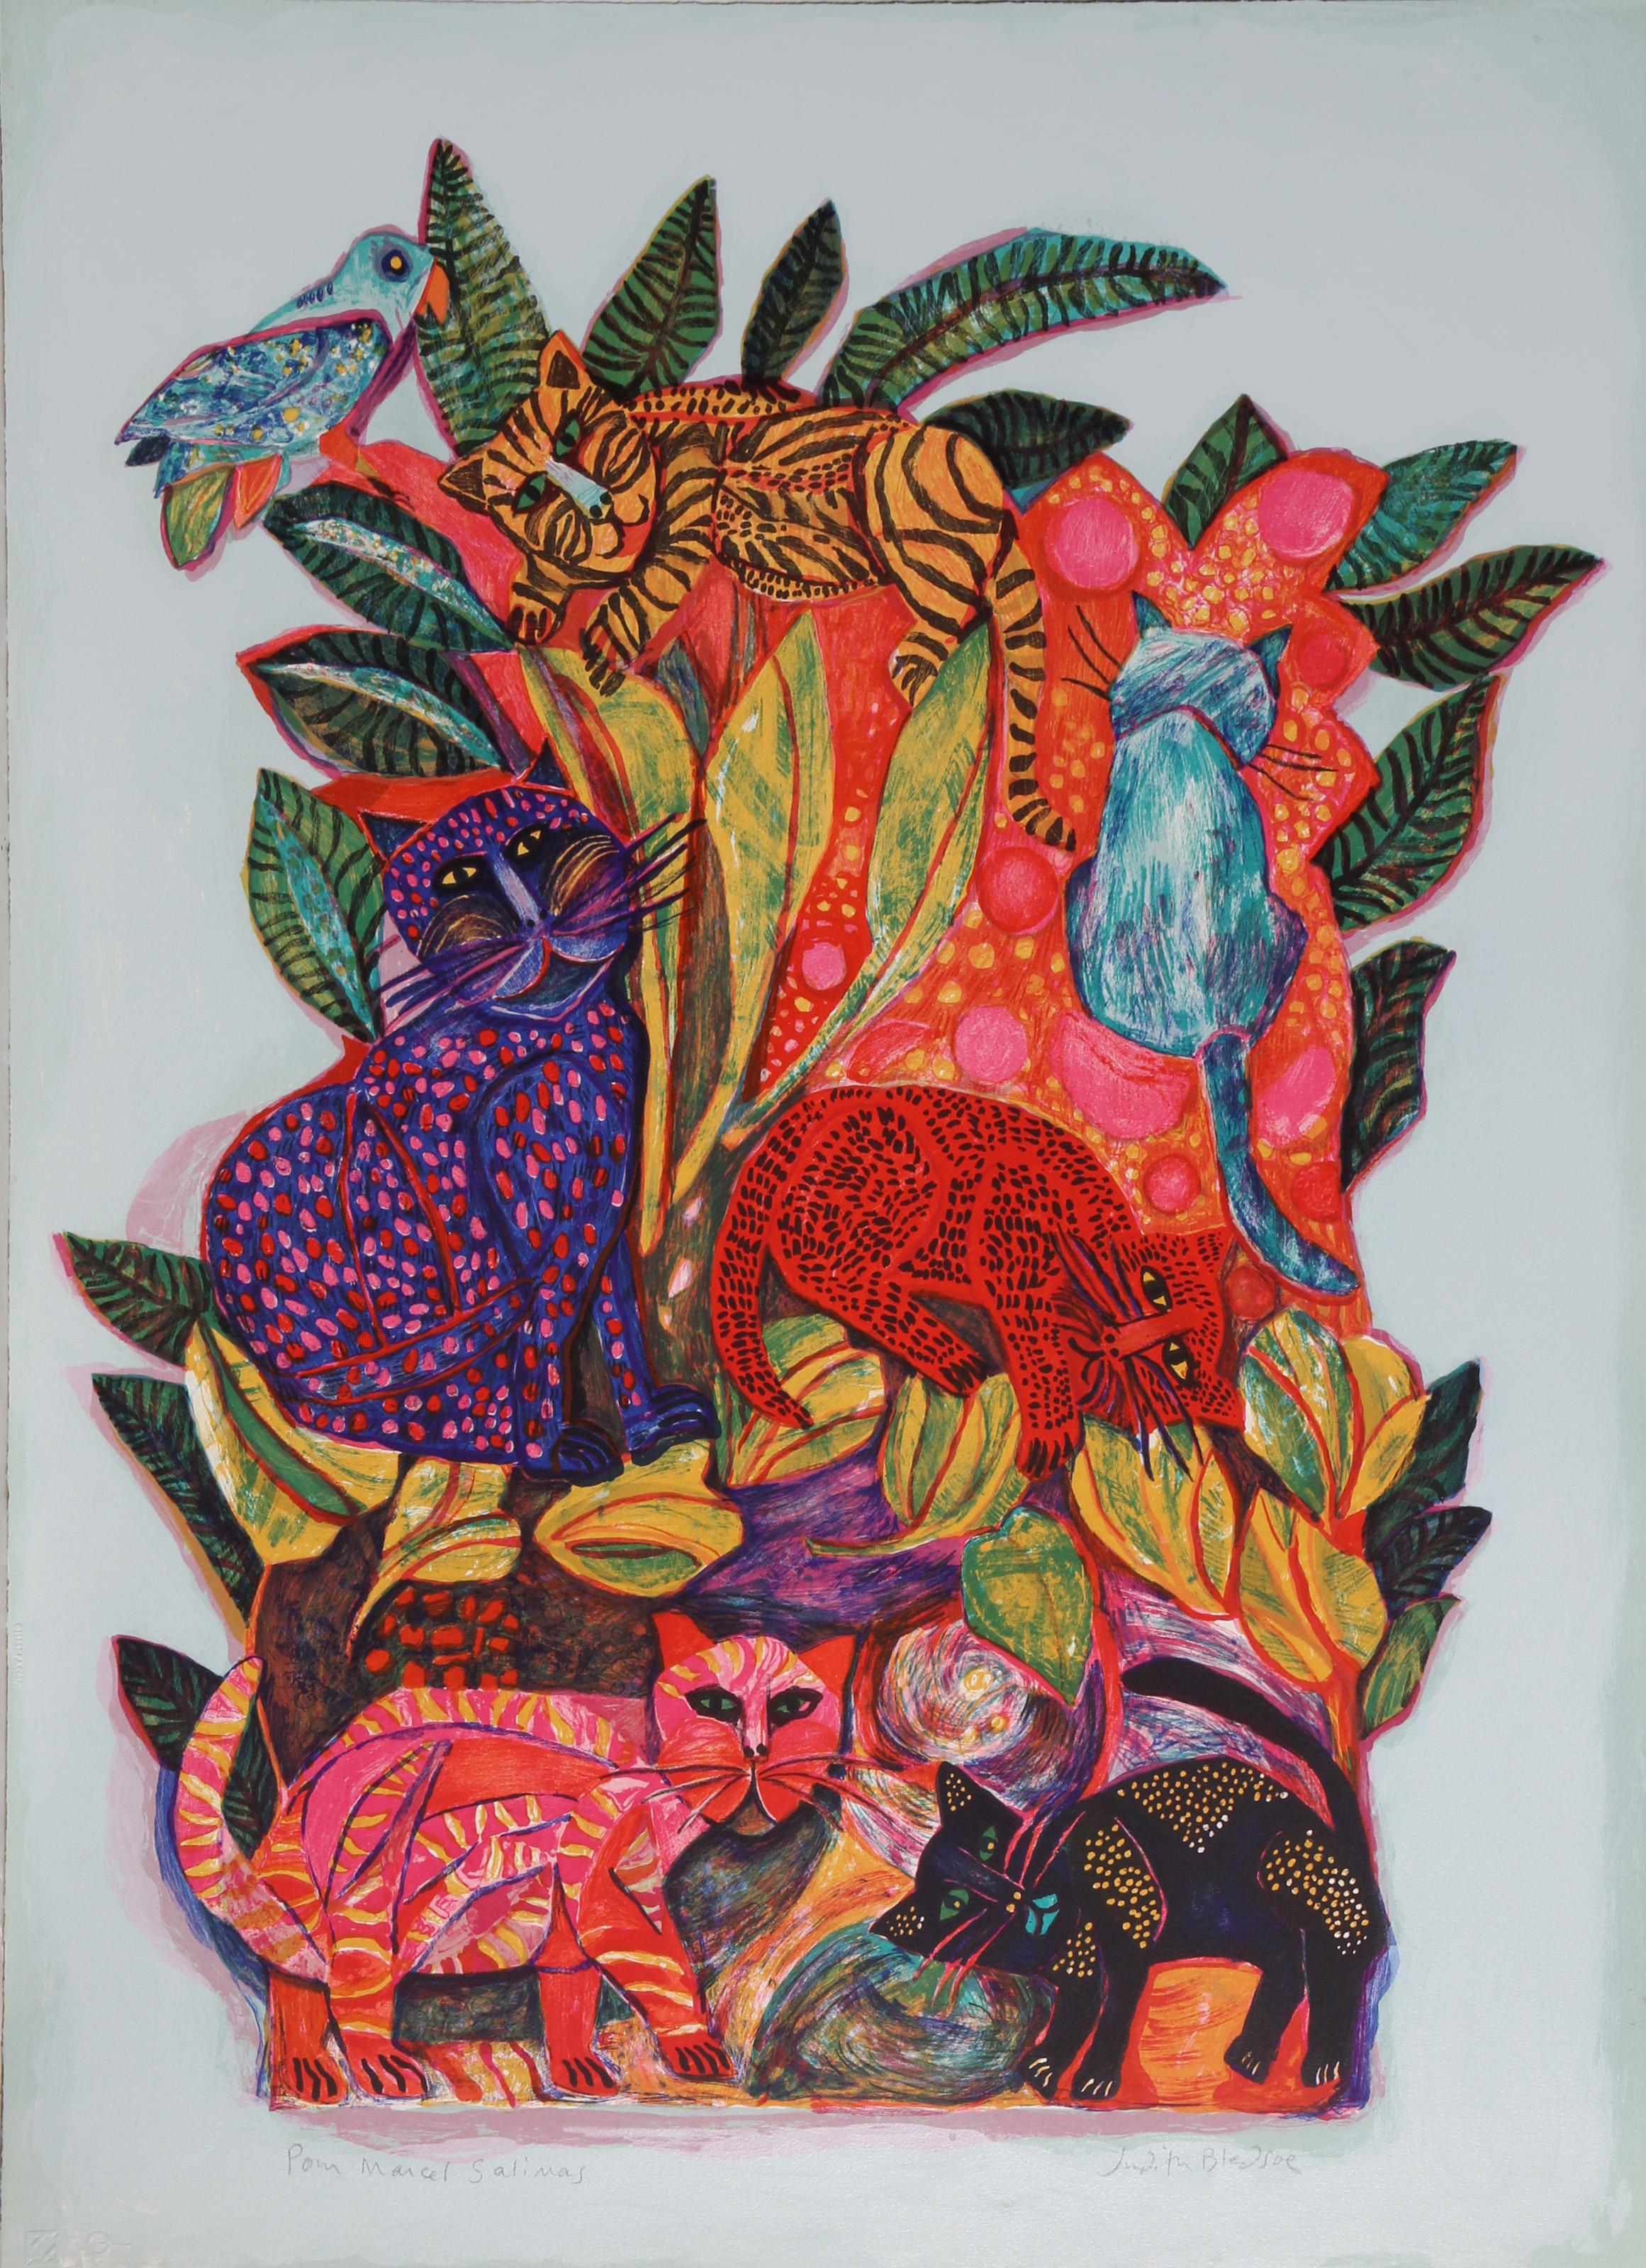 Judith Bledsoe, American (1938 - 2013) -  Tropical Cats. Year: circa 1975, Medium: Lithograph, signed and dedicated in pencil, Size: 35 x 25.5 in. (88.9 x 64.77 cm), Description: This colorful rendering of cats by Judith Bledsoe reflects the